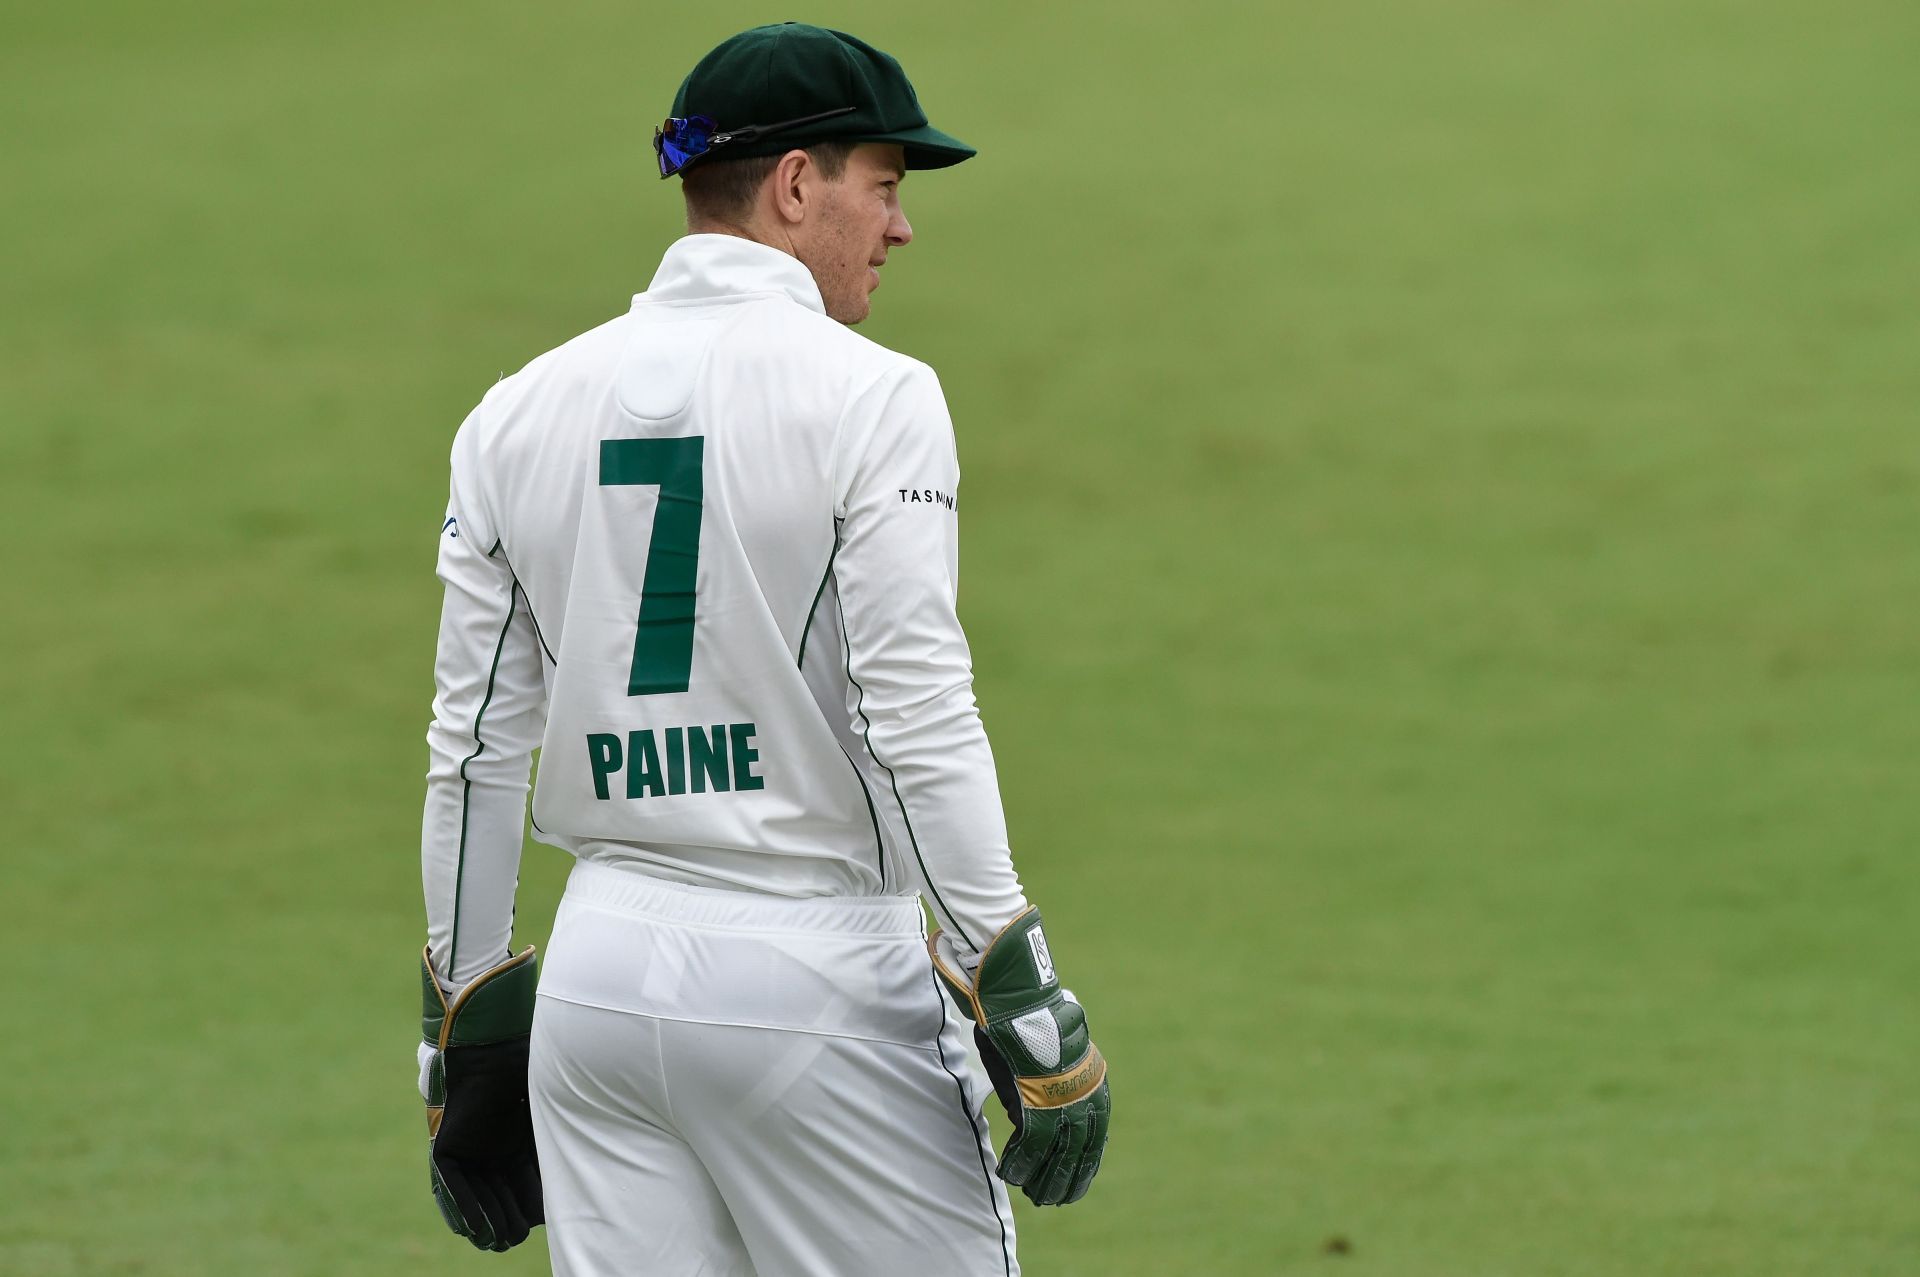 Tim Paine lost his captaincy and his place in the Aussie team after the text-gate scandal